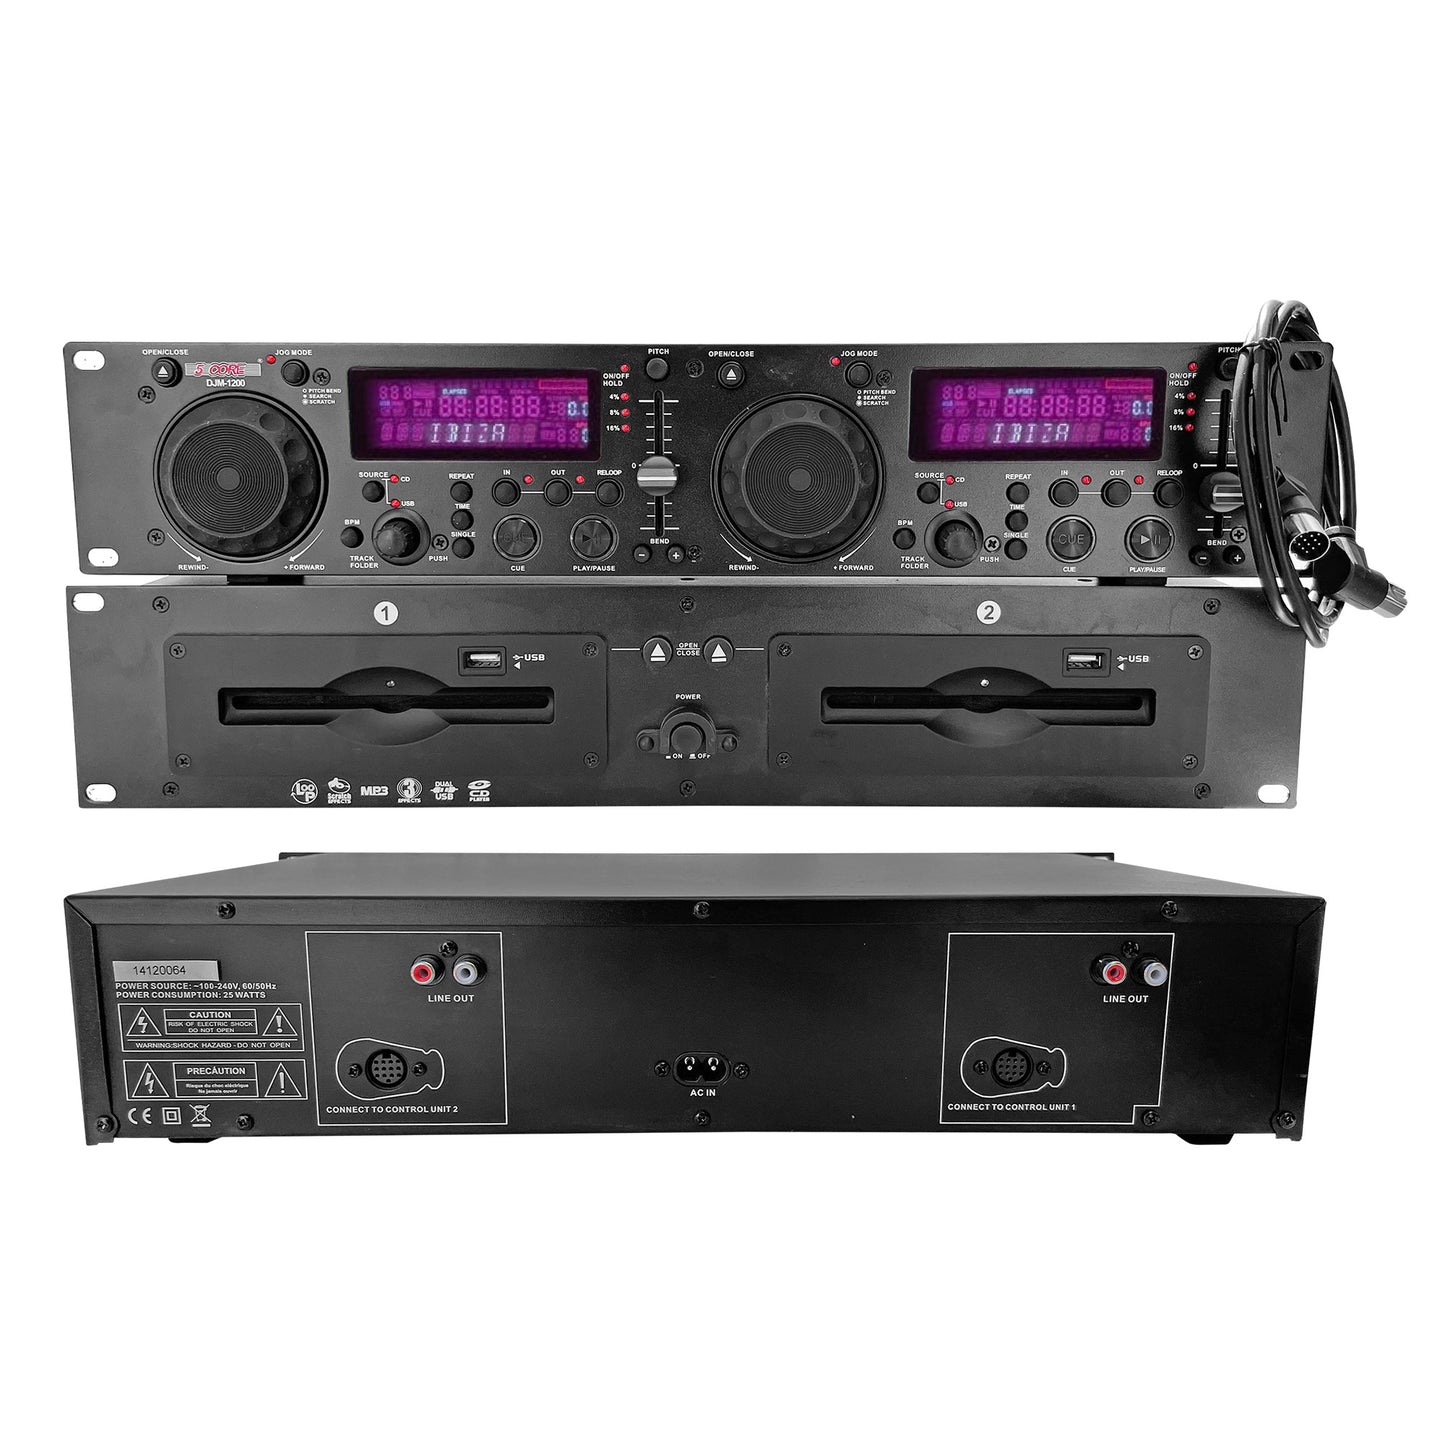 5 Core Dual Rack Mountable Professional Audio Pitch Control/ Premium DJ Equipment Multimedia/ Portable CD Media Player with Audio CD, MP3 Compatible with USB Input - DJM 1200